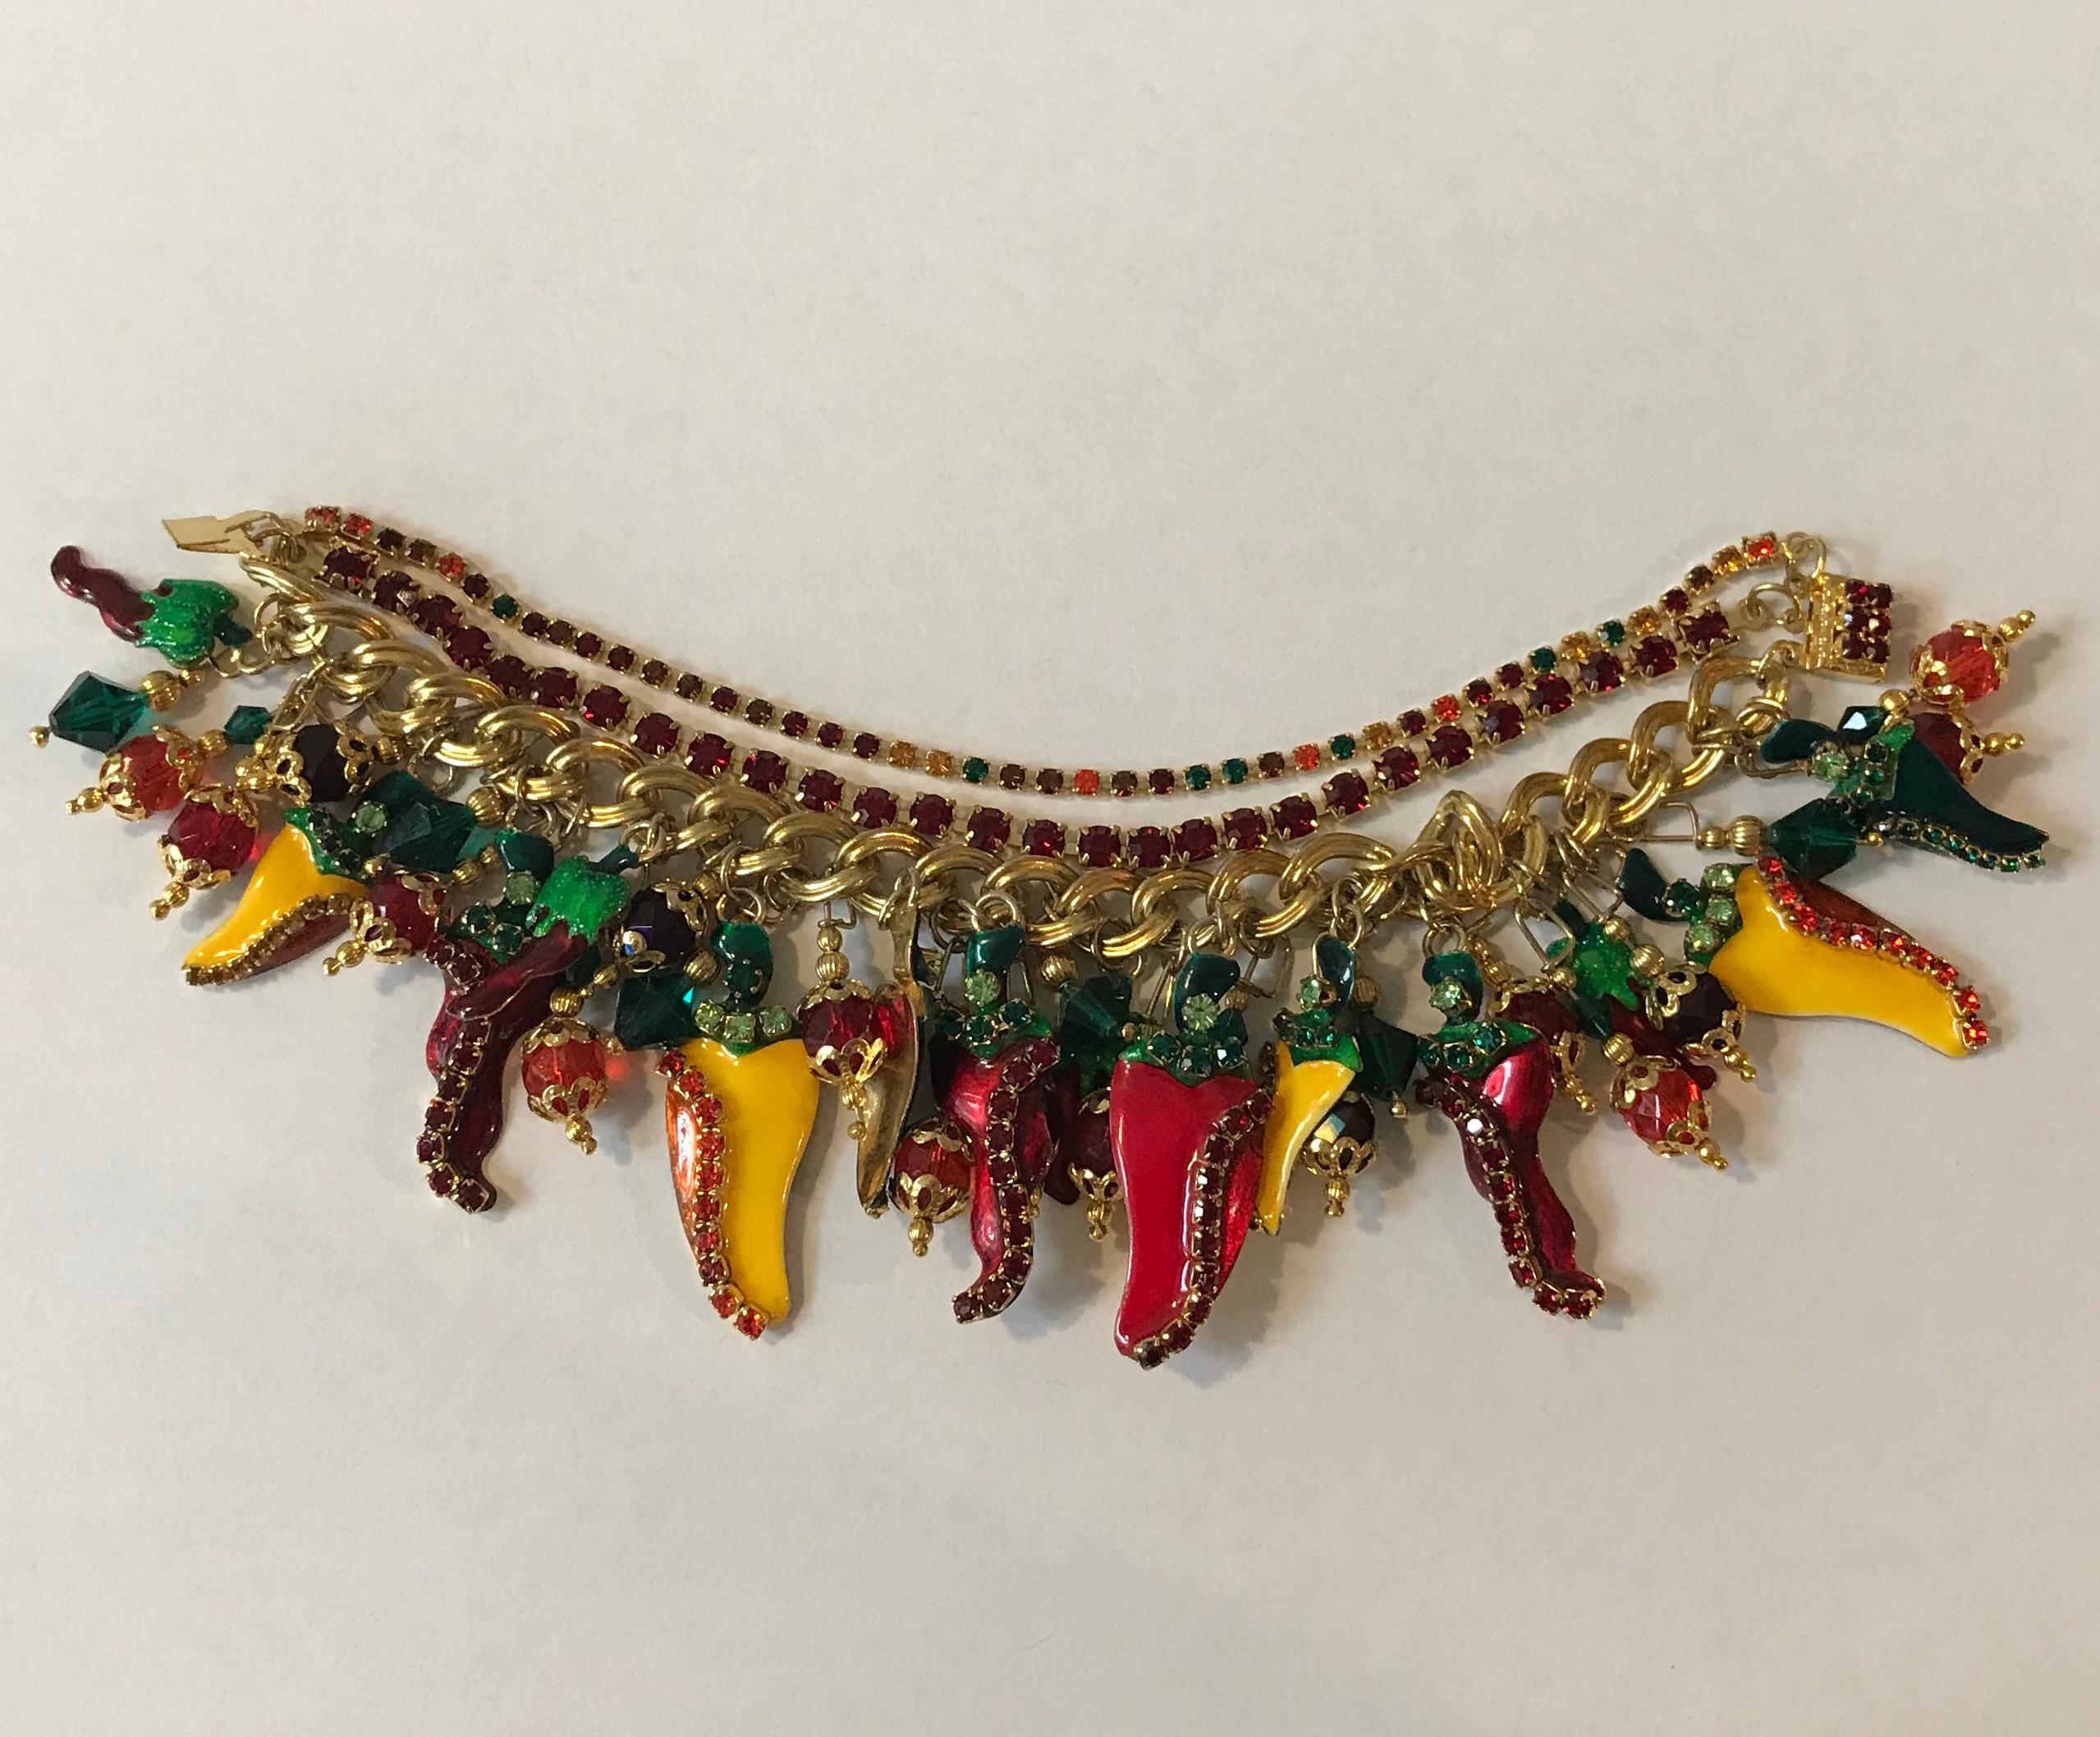 Lunch at the Ritz vintage 1990s gold tone chili pepper theme bracelet featuring enamel and rhinestone details. This over the top pepper themed costume jewelry bracelet features yellow, red, and green enamel pepper charms accented with rhinestones on